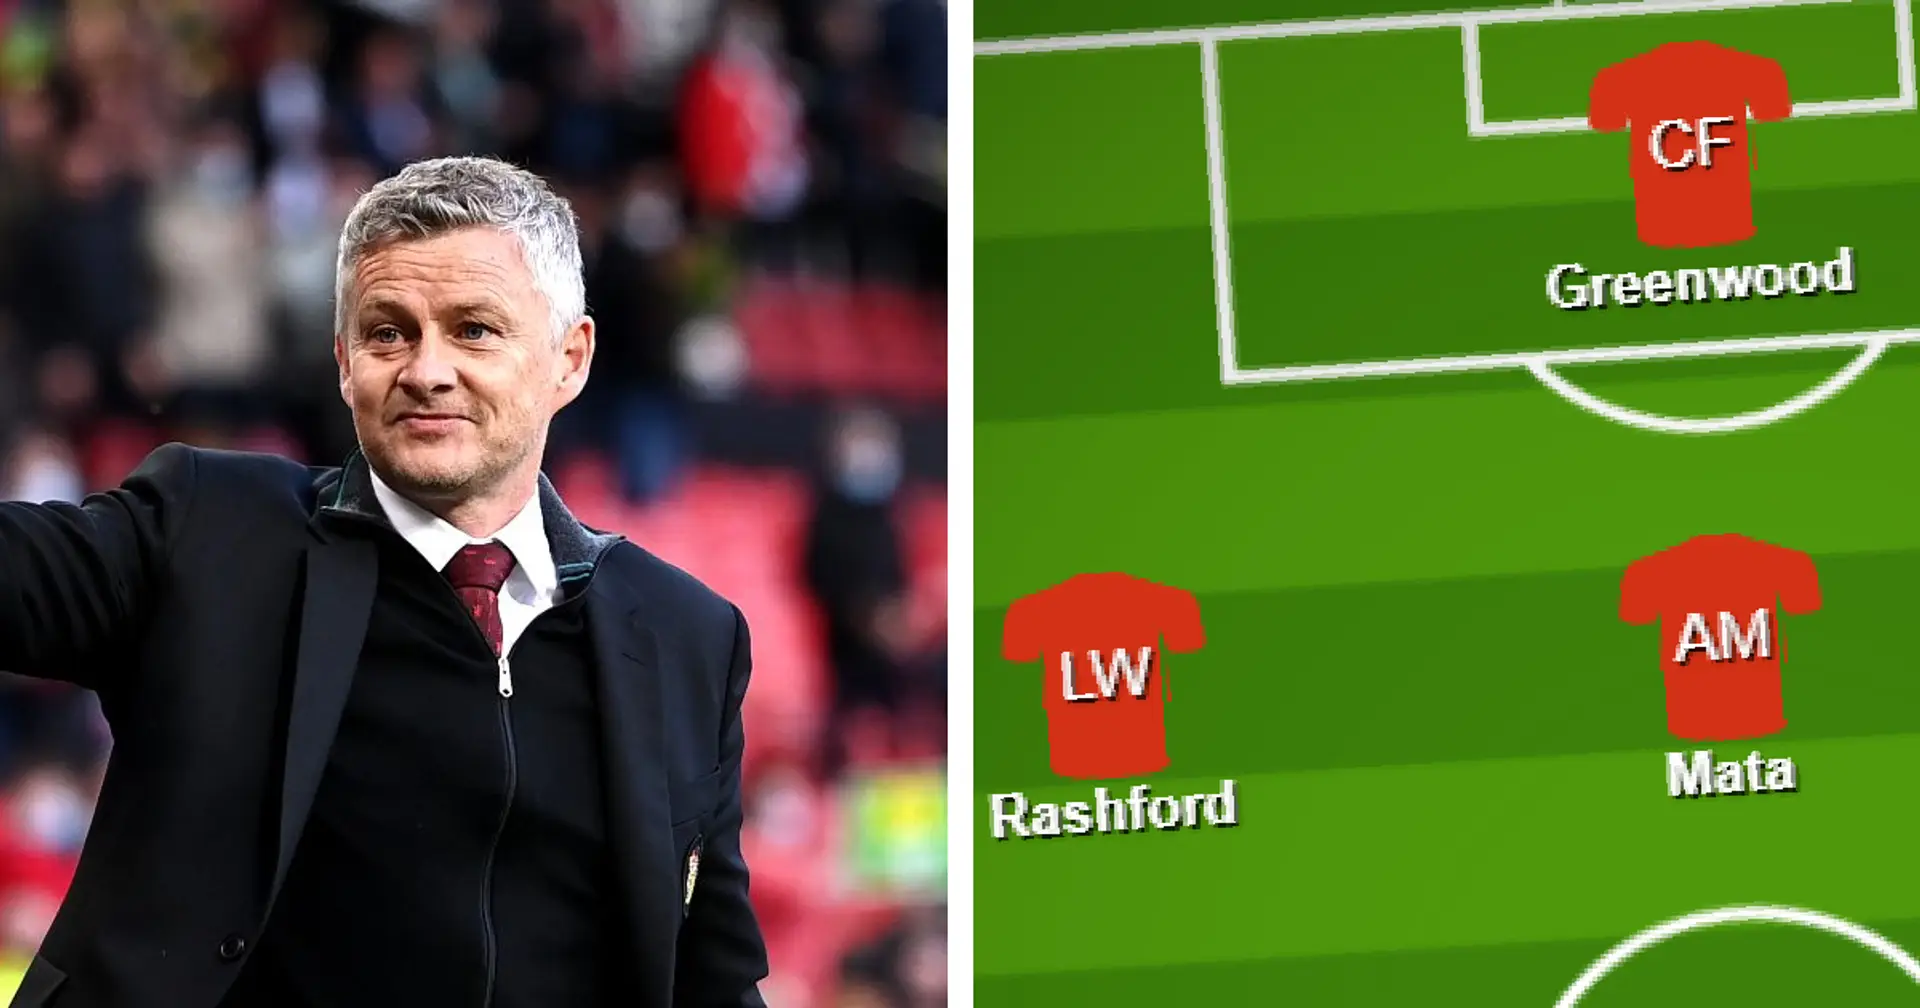 Wolves vs Man United: Team news, probable line-ups, score predictions and more - preview